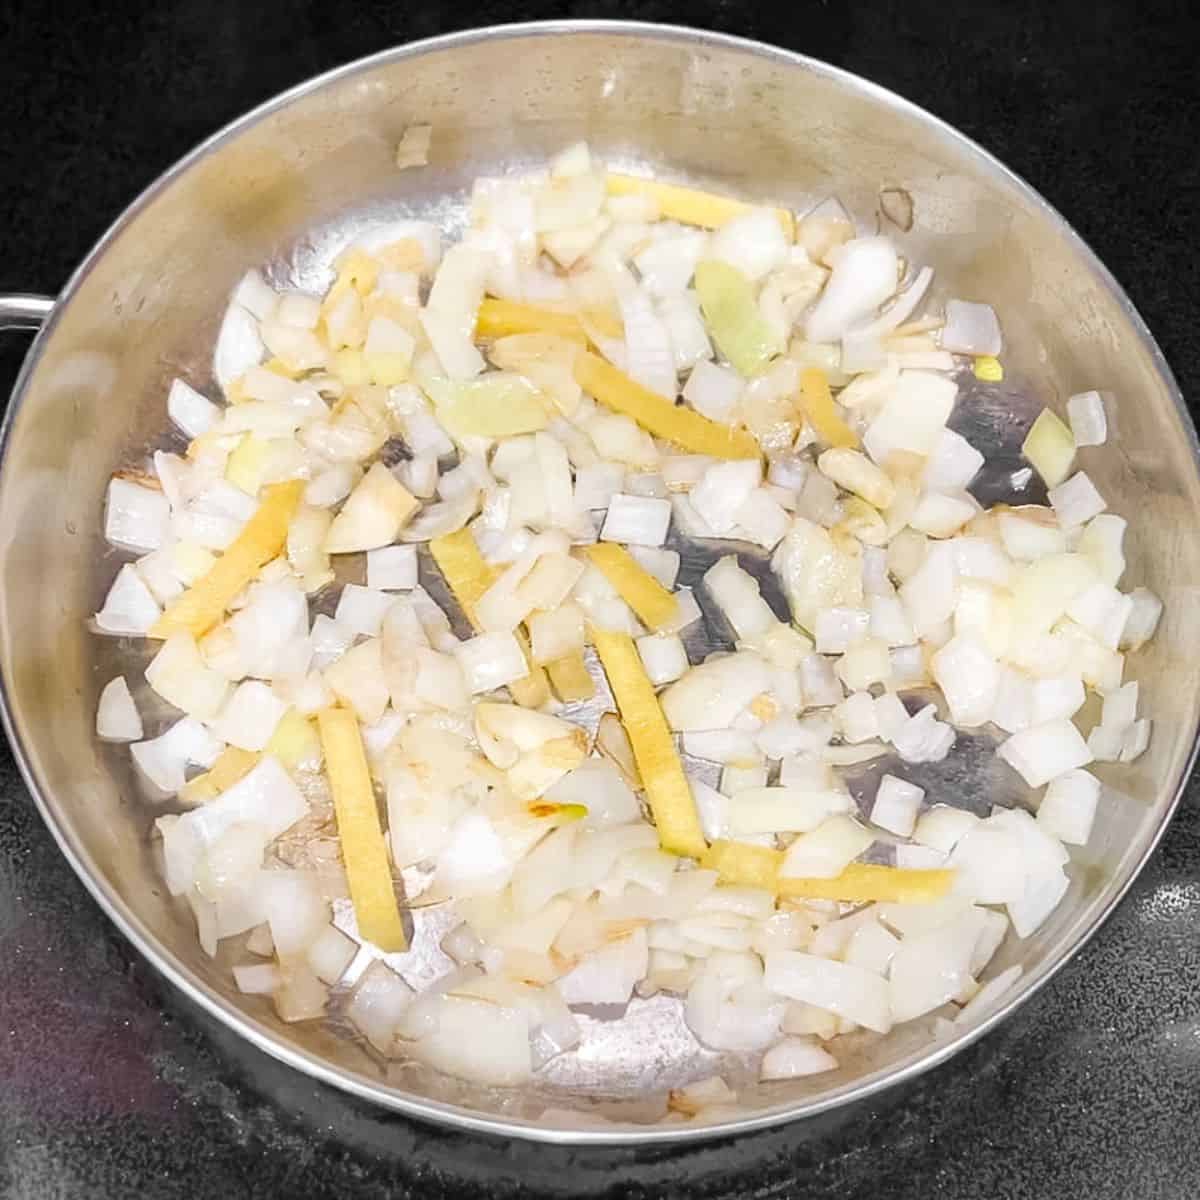 Sauted onion, garlic, and ginger in a skillet.